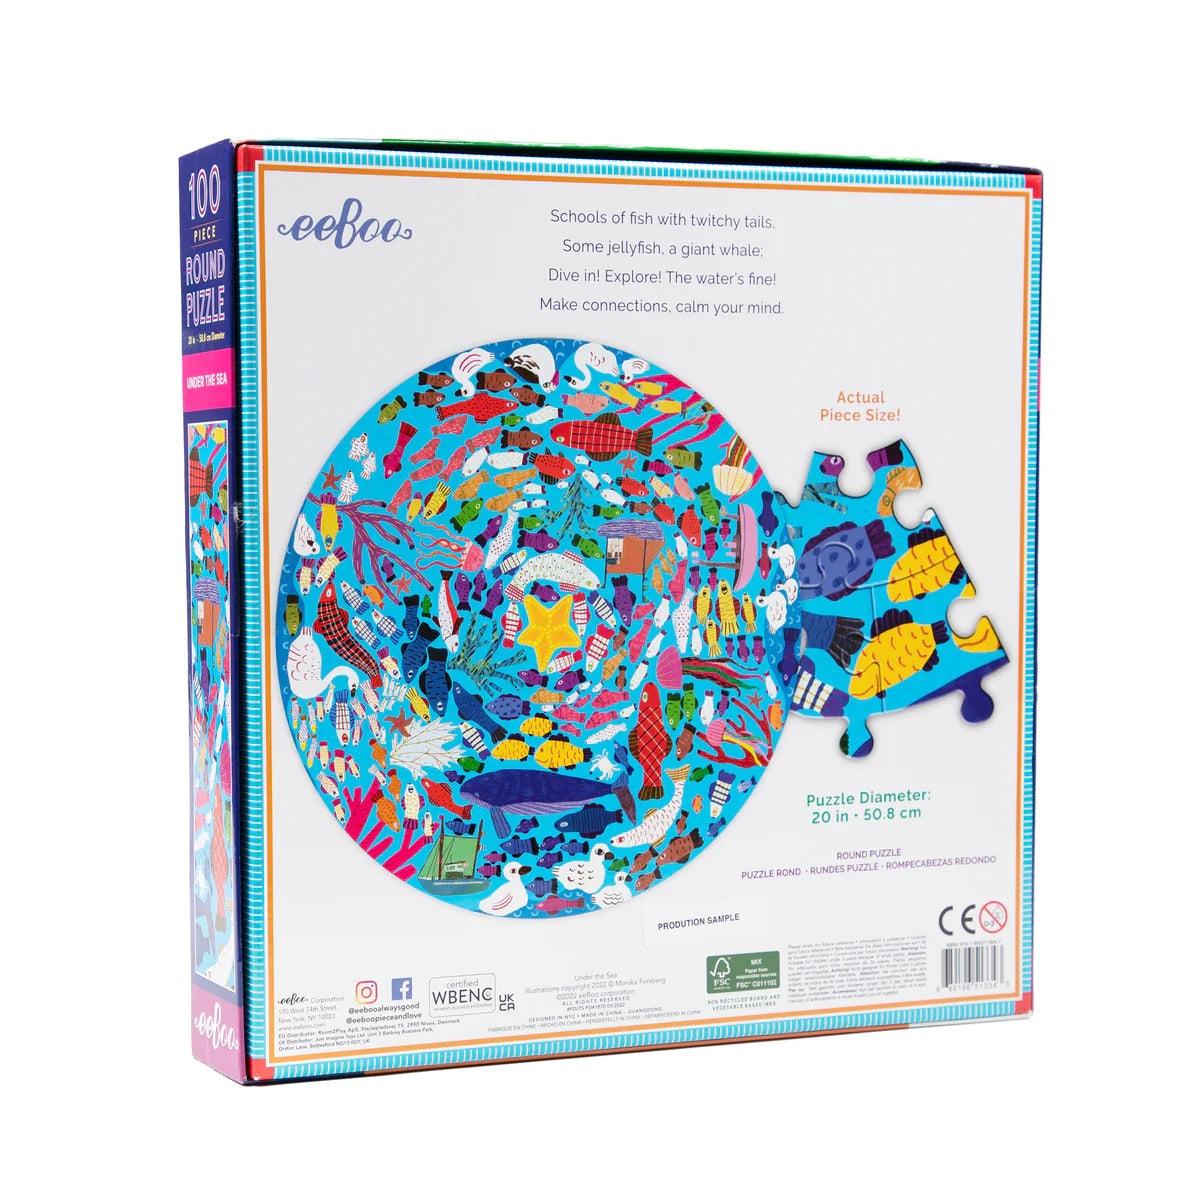 Under the Sea 100-piece round puzzle, back of box